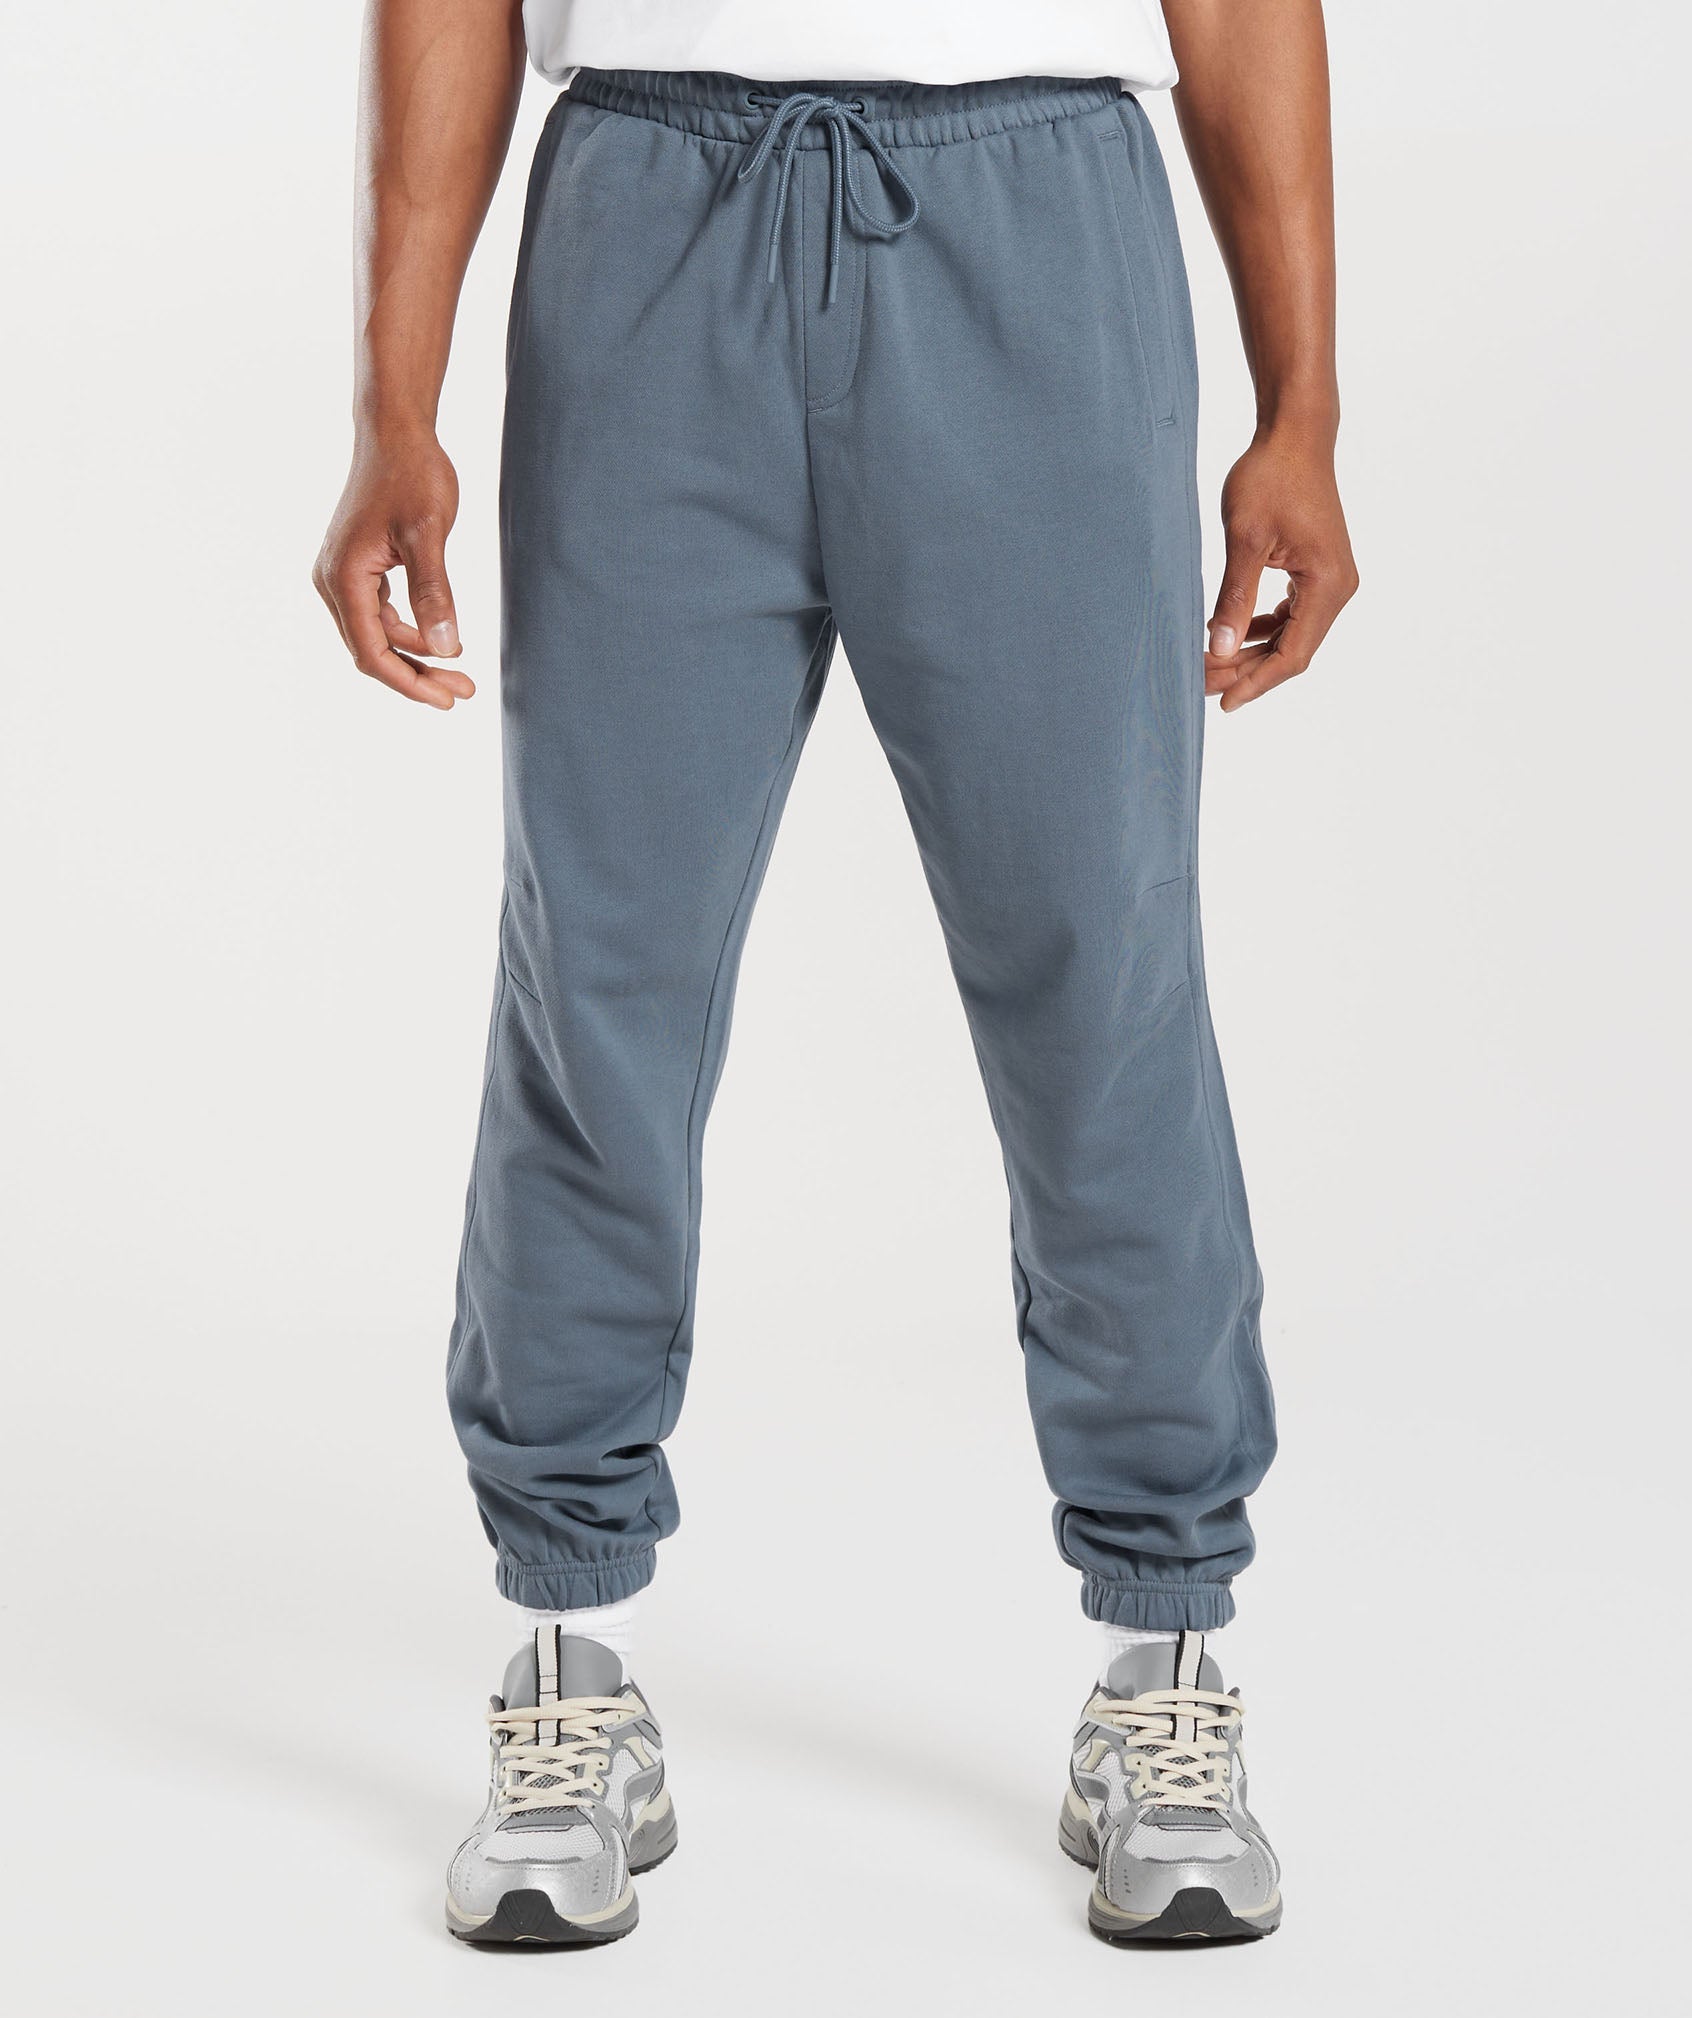 Rest Day Essentials Joggers product image 1